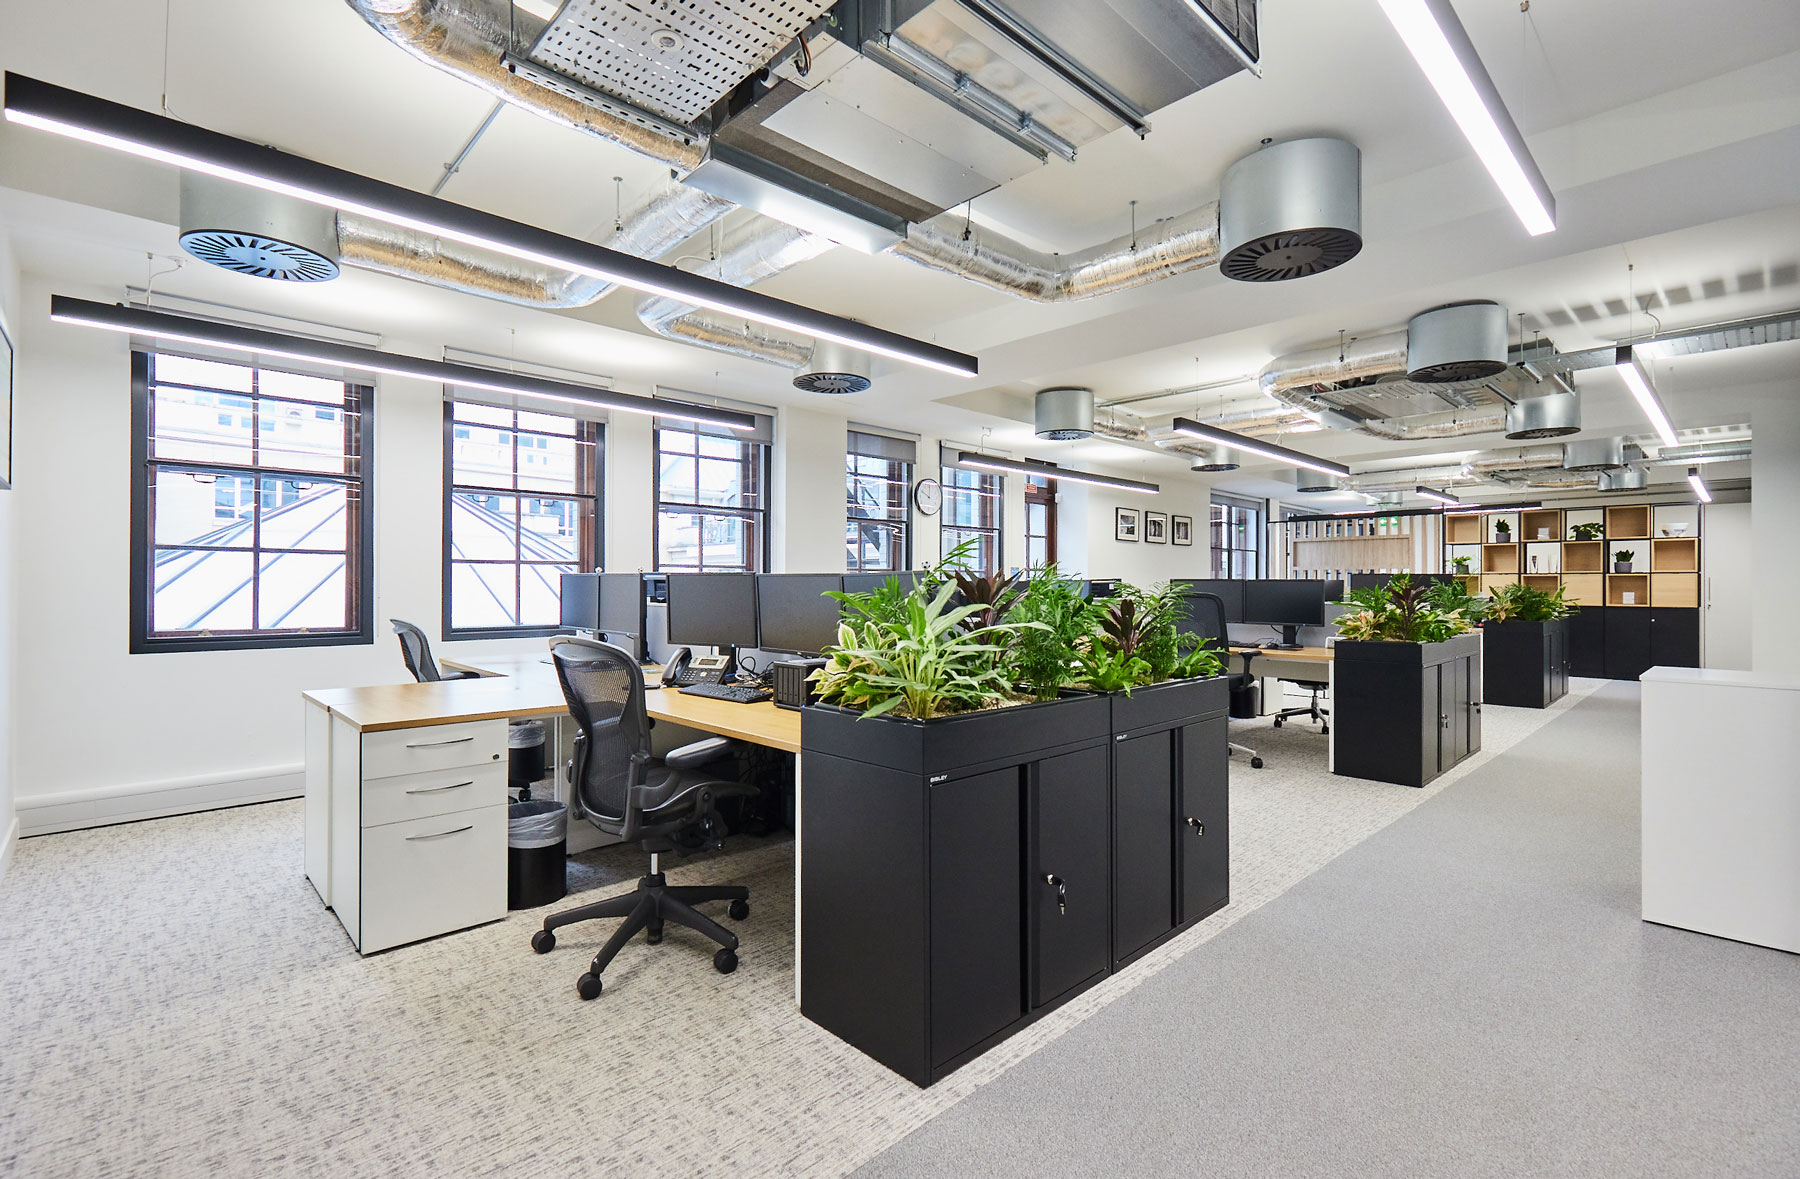 Biophilia flourishes in a modern office with desking and exposed mechanical and engineering services in the ceiling